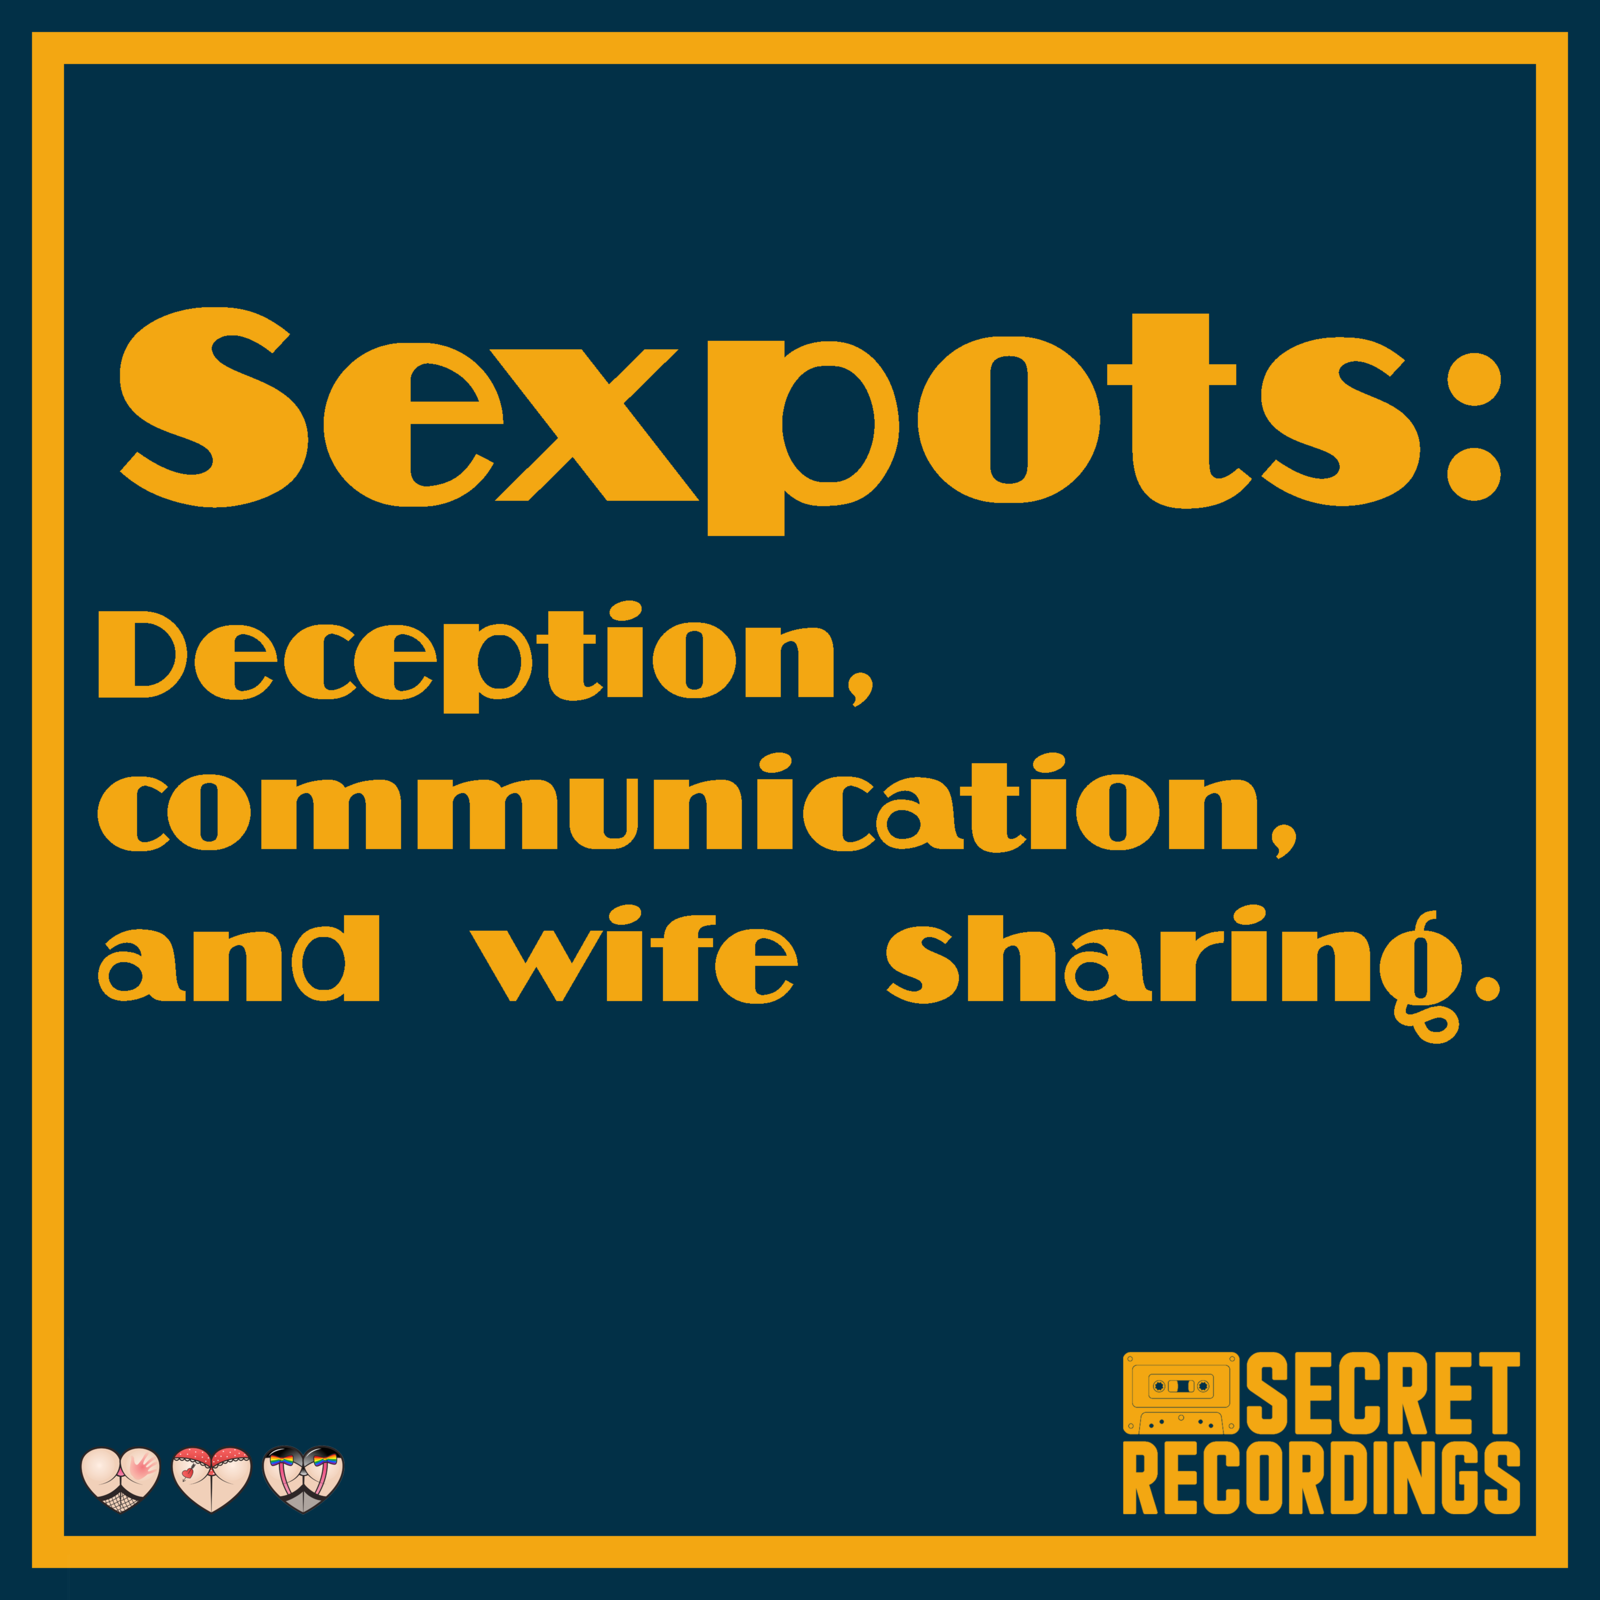 88 Deception, communication, and wife sharing